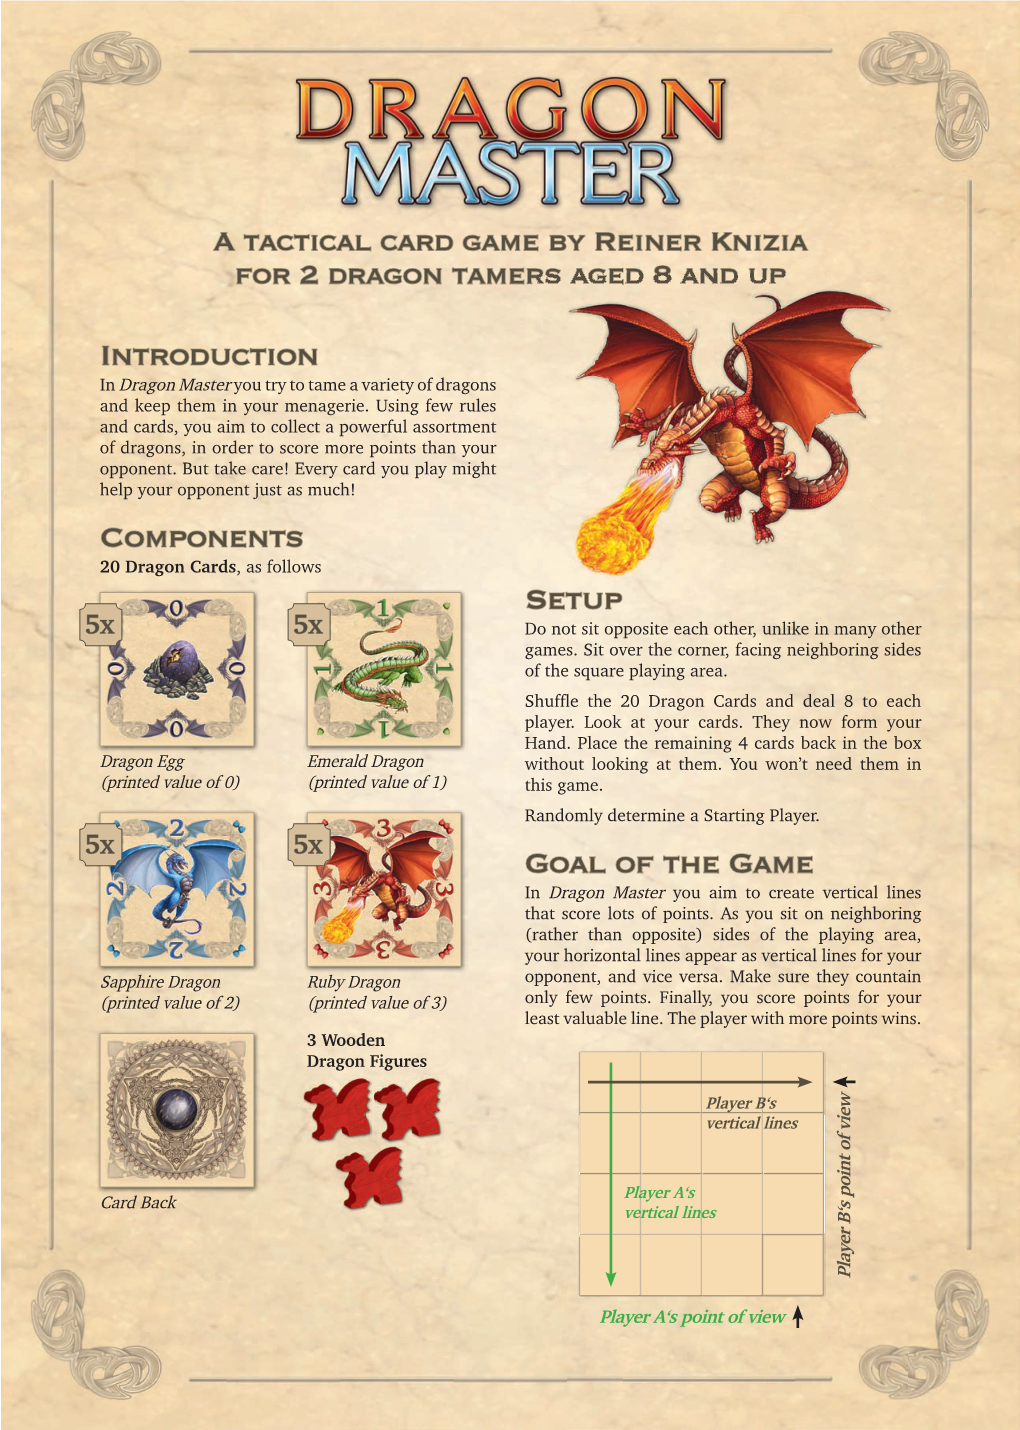 A Tactical Card Game by Reiner Knizia for 2 Dragon Tamers Aged 8 and Up